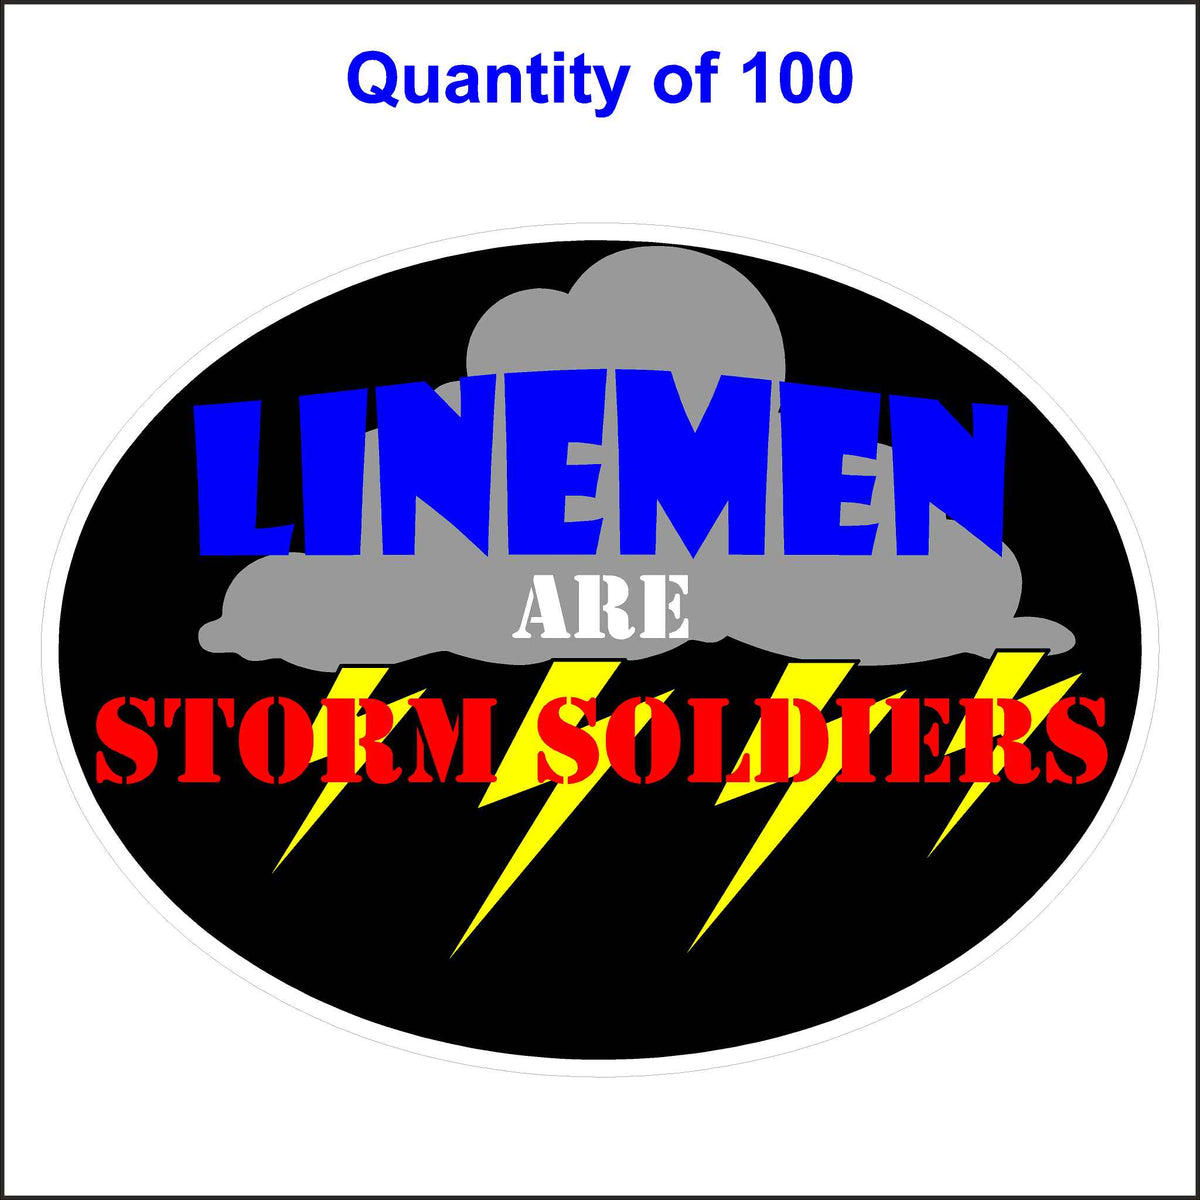 Black Lineman Are Storm Soldiers Stickers. 100 Quantity.